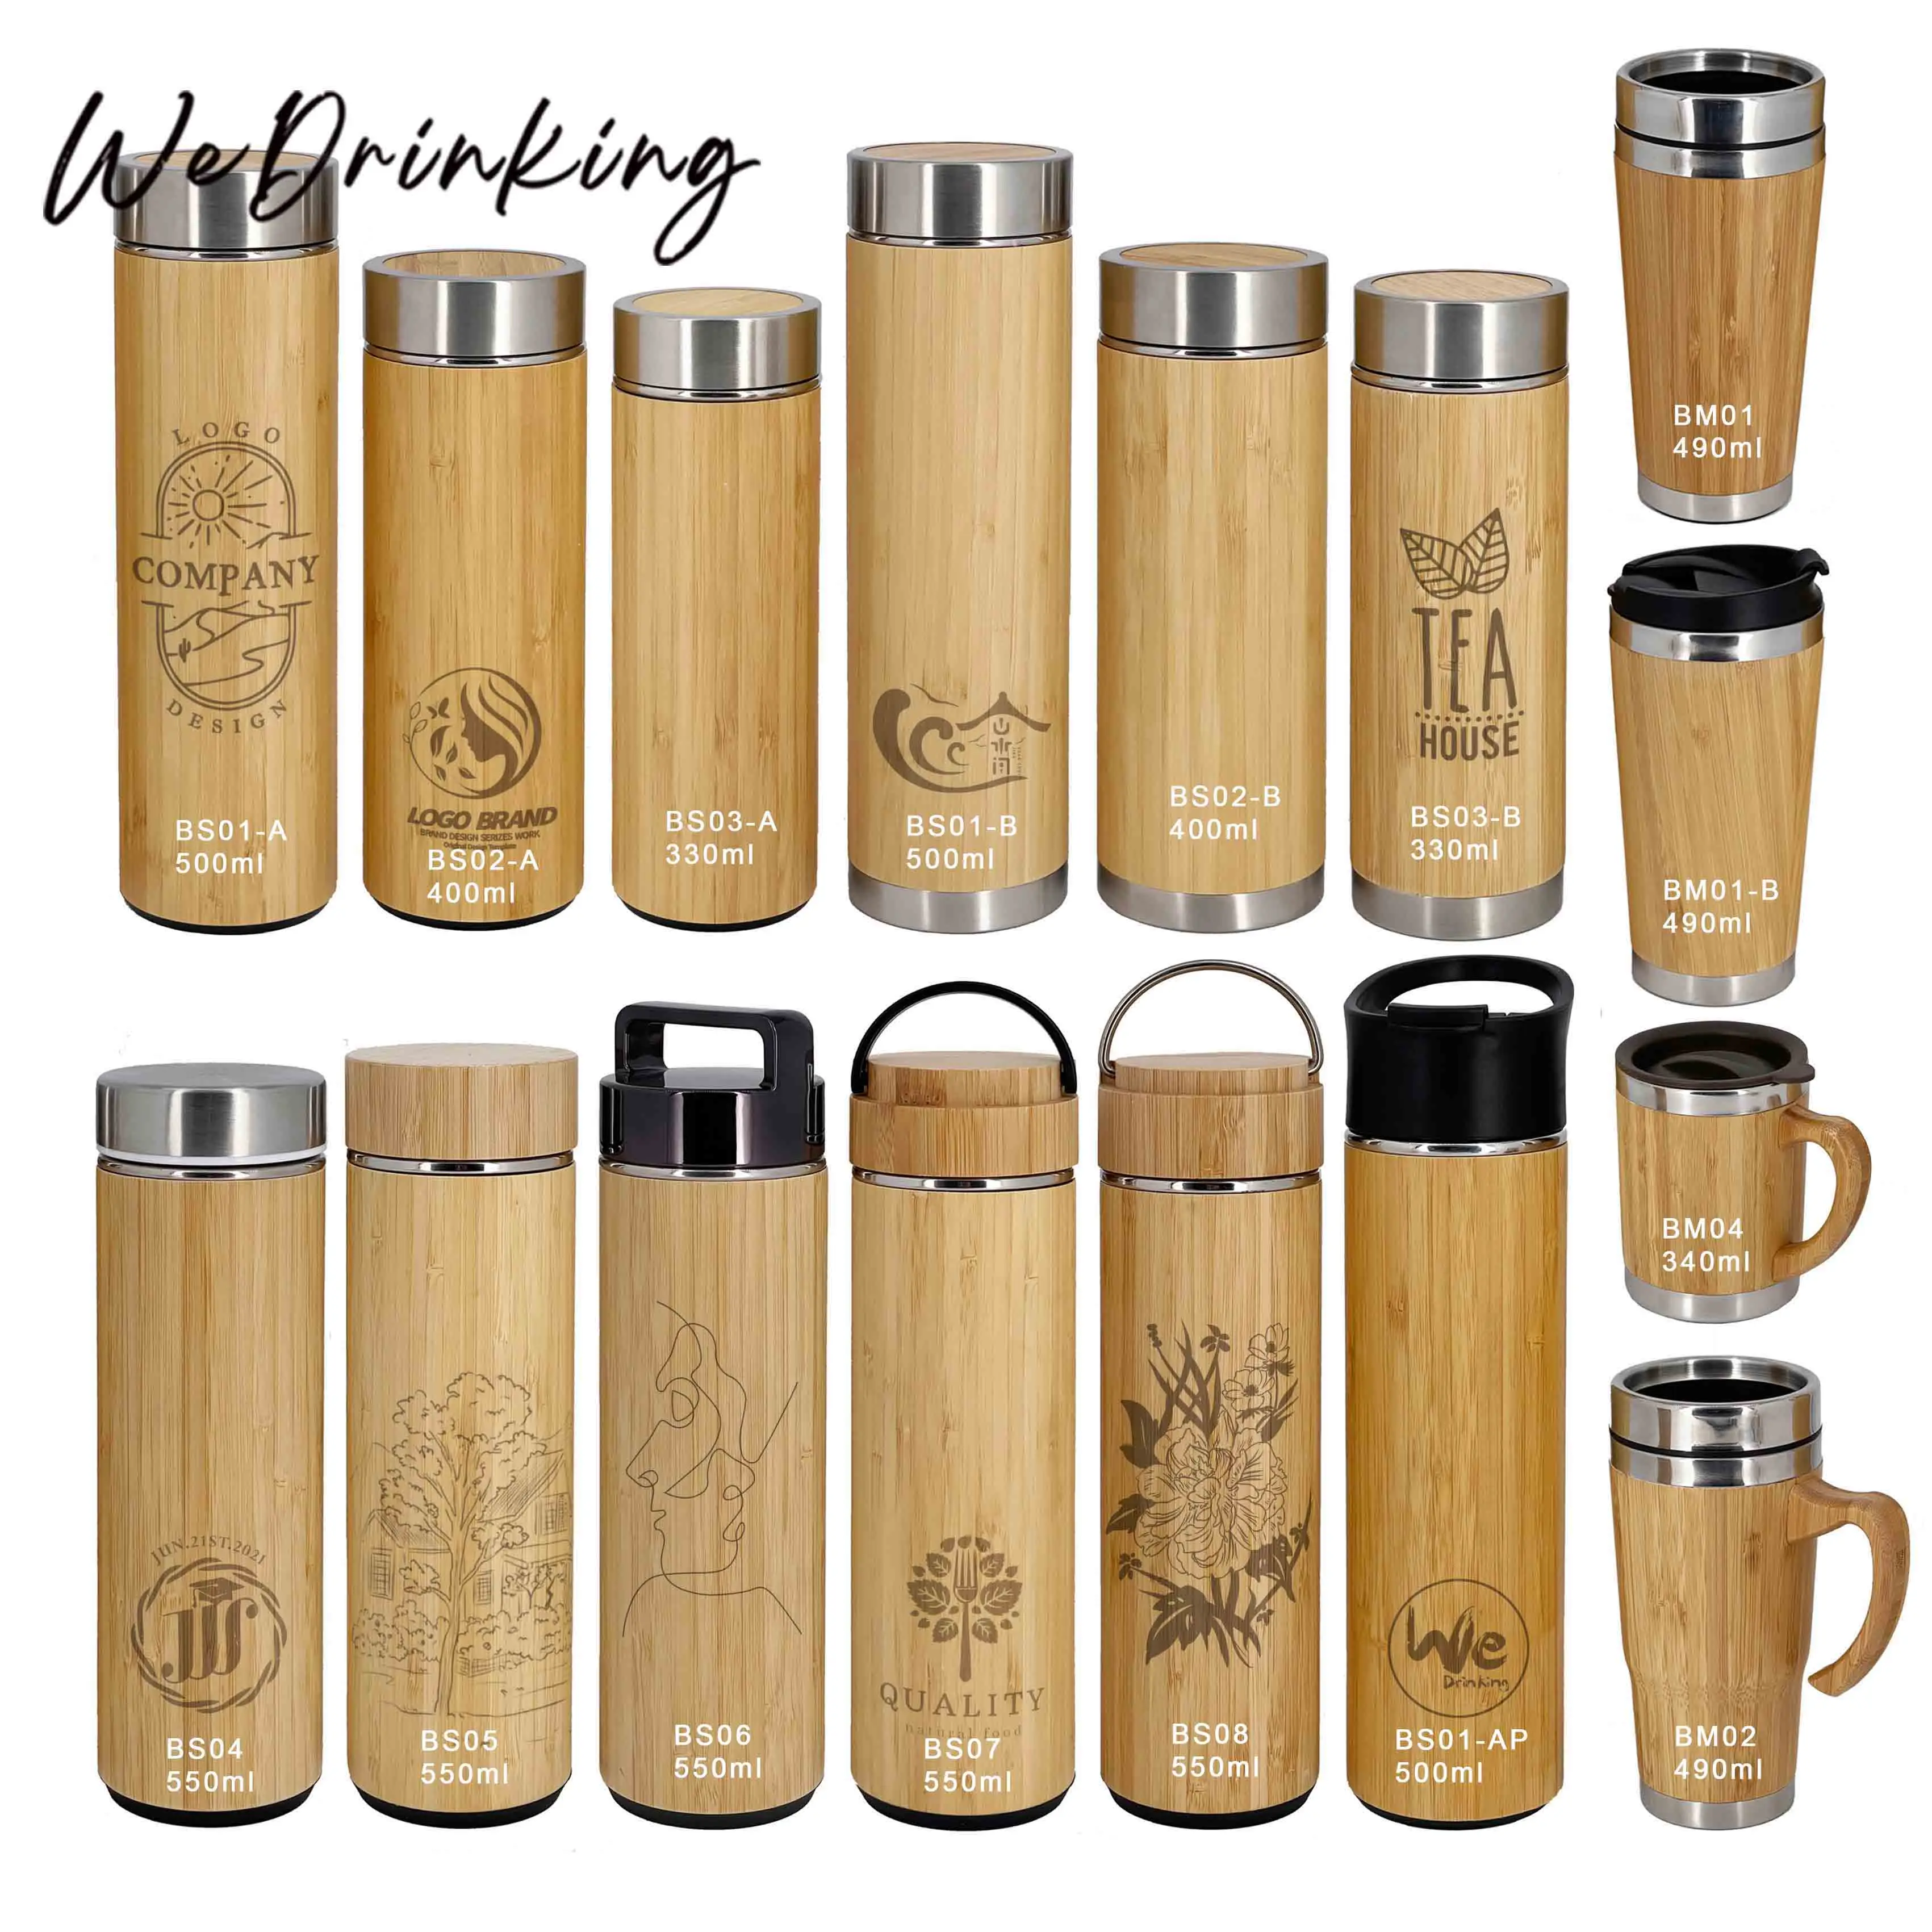 

BS04 550ml Big Capacity Original Bamboo Tea Tumbler with Infuser and Strainer for Brewing Loose Leaf and Detox Tea